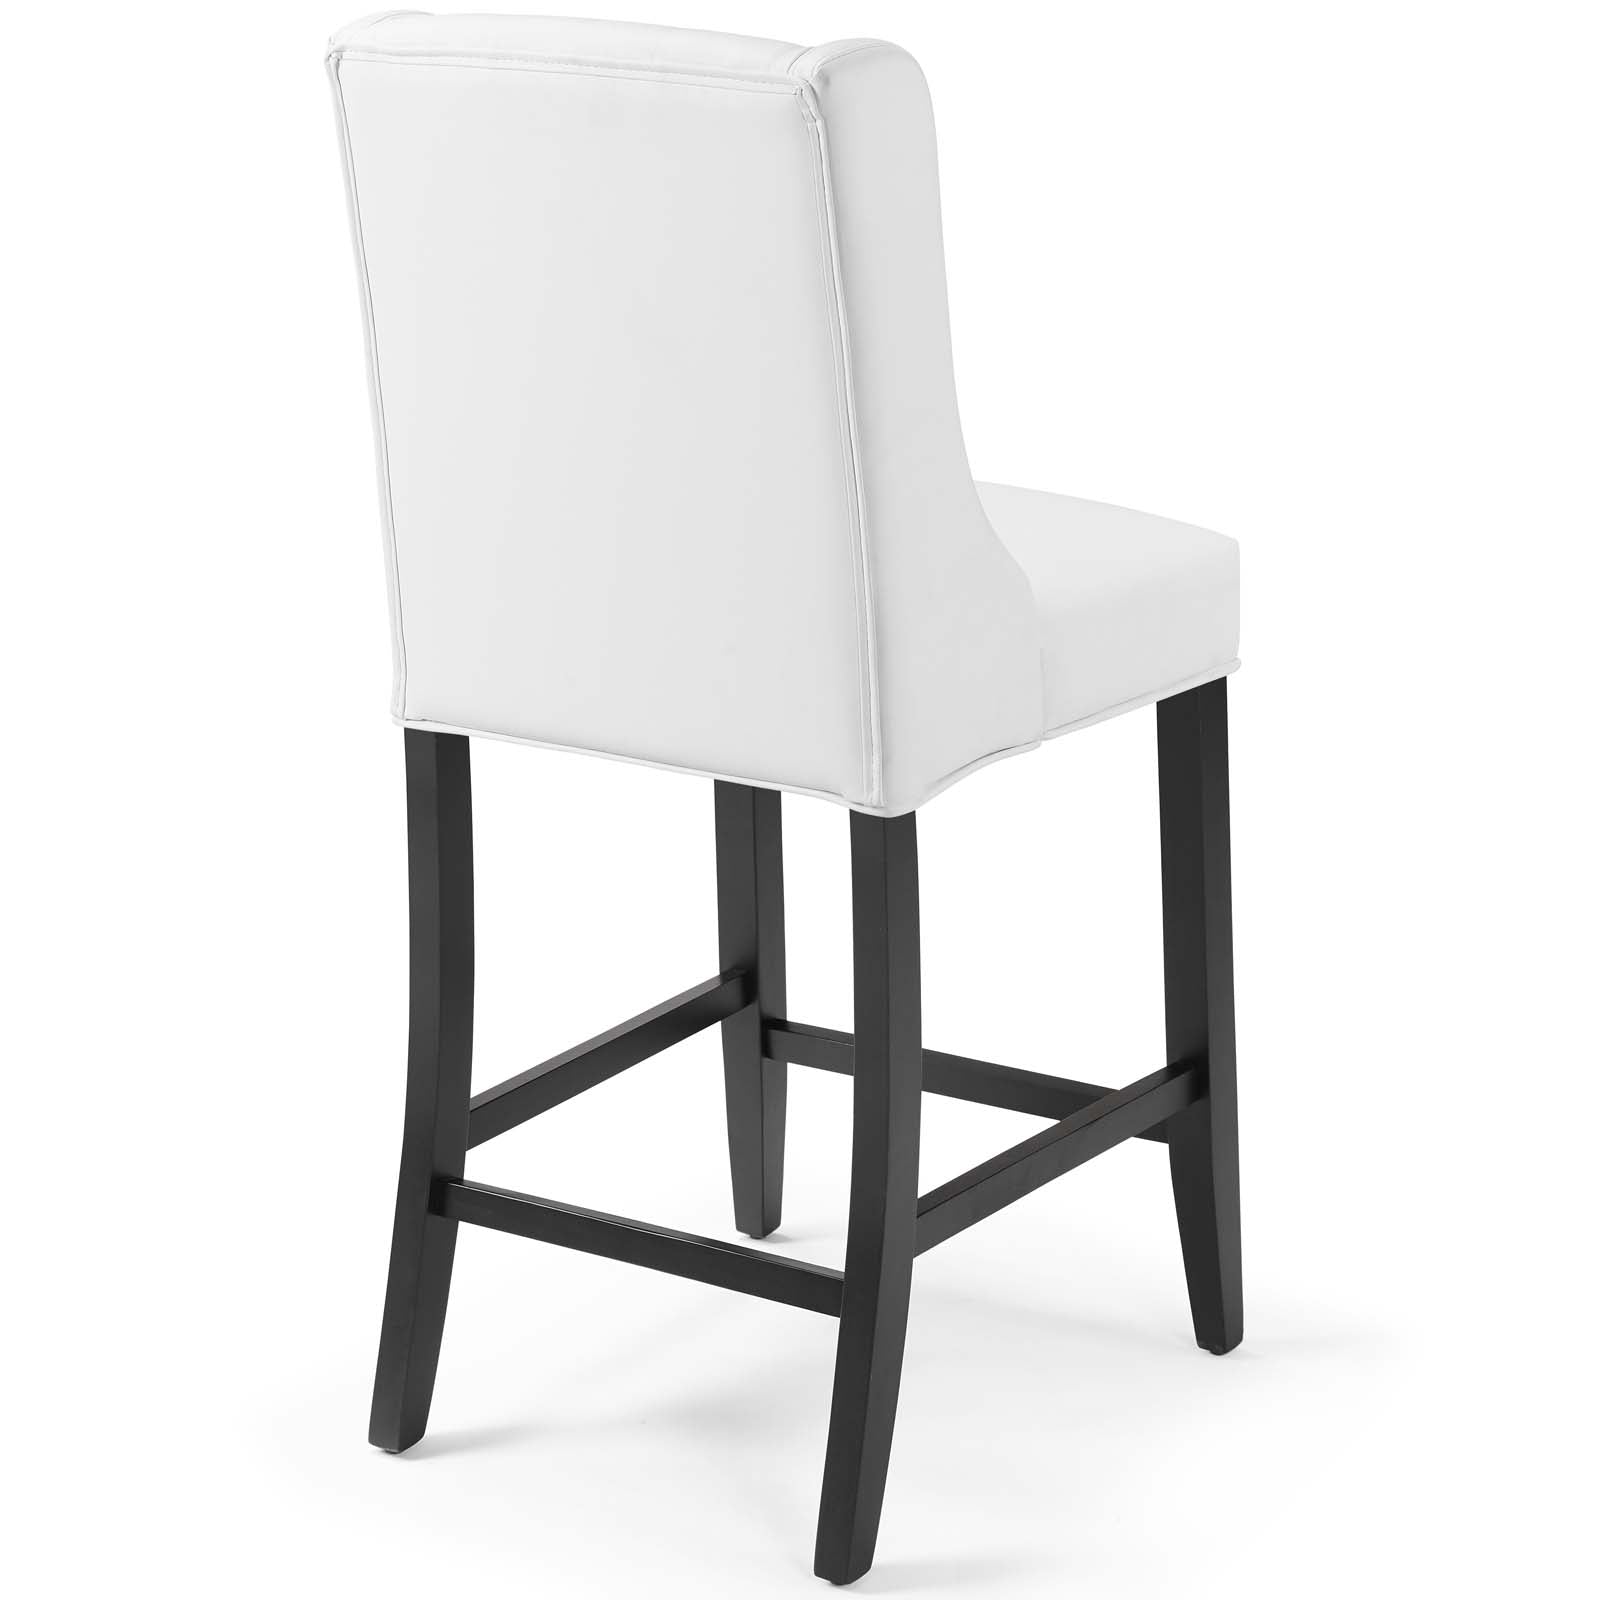 Baronet Tufted Button Faux Leather Counter Stool - East Shore Modern Home Furnishings